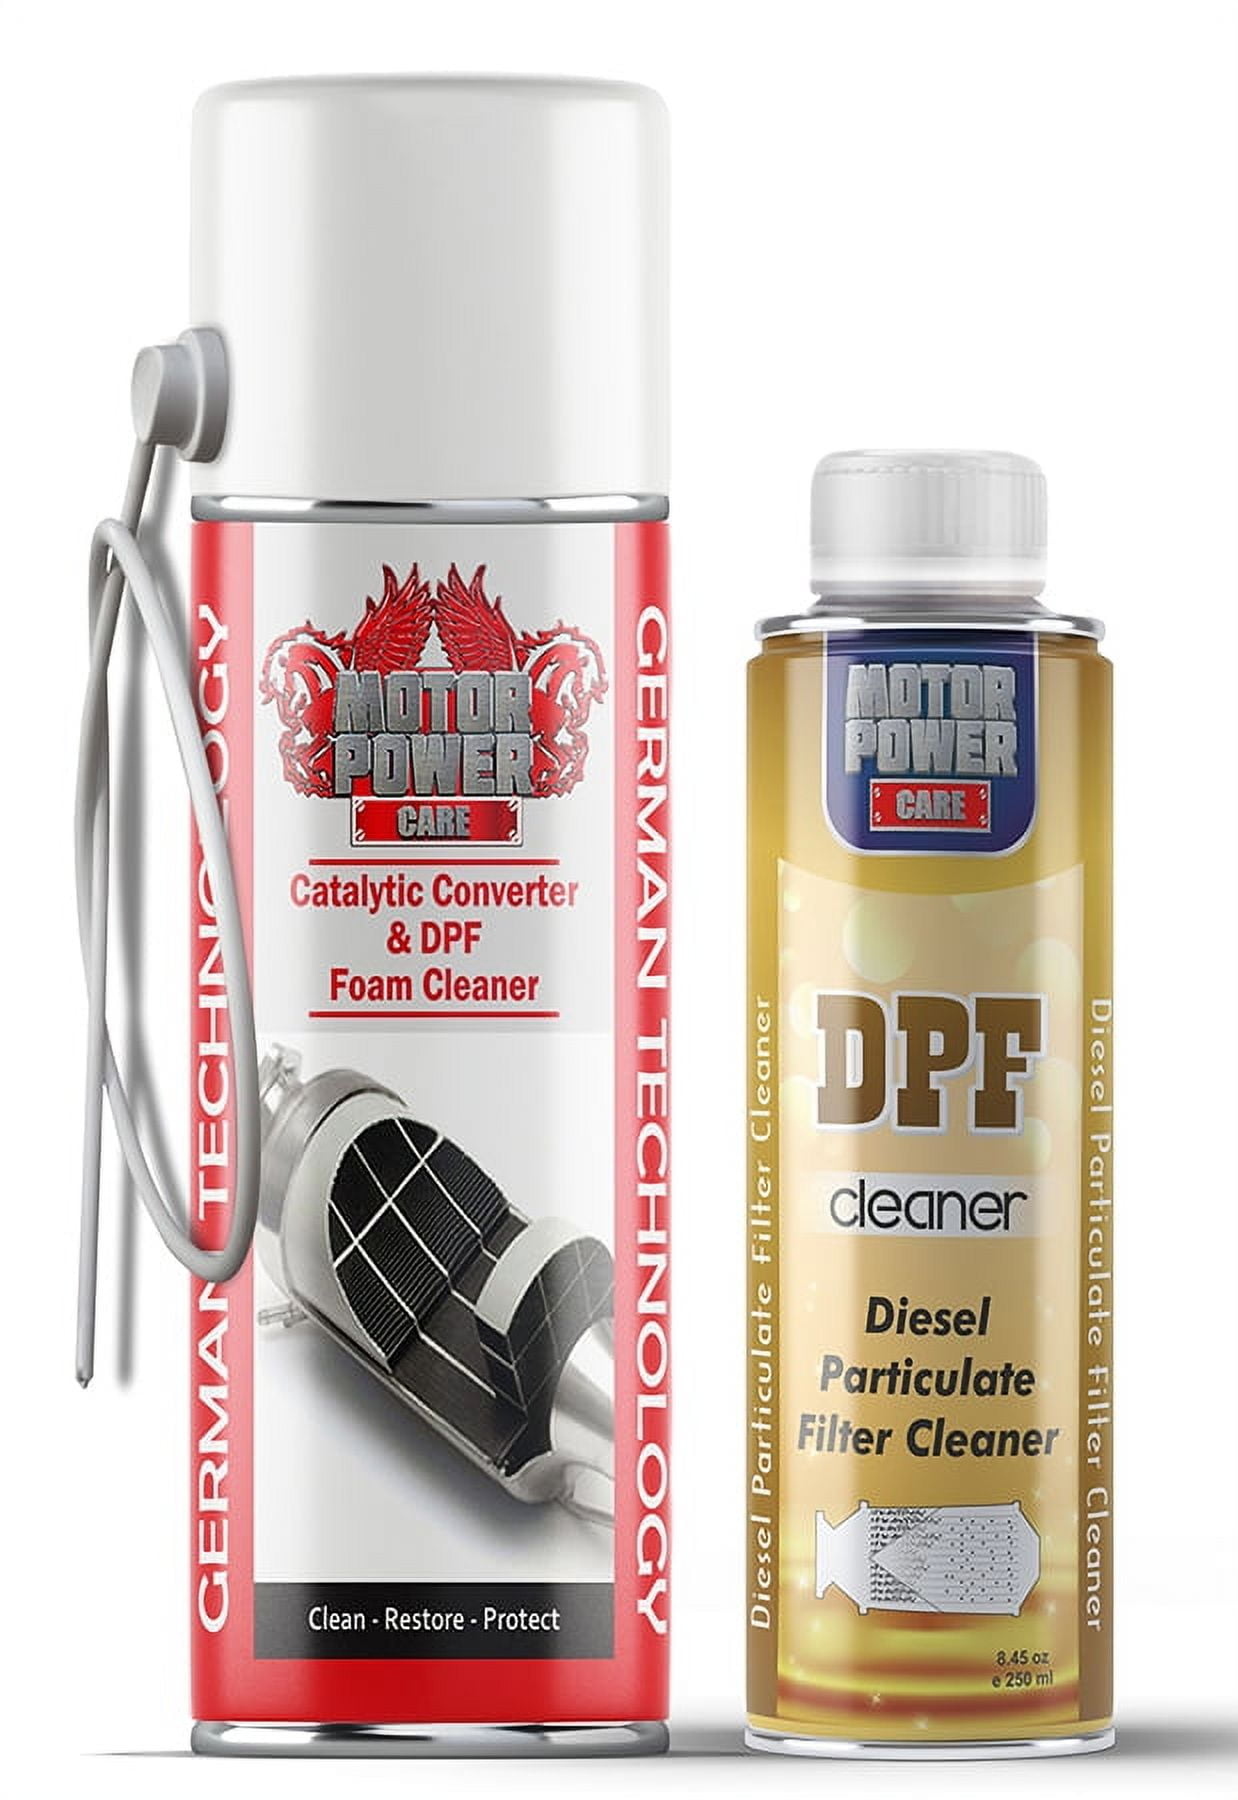 2x Presto diesel particulate filter cleaner DPF cleaner with probe 400ml  soot fi